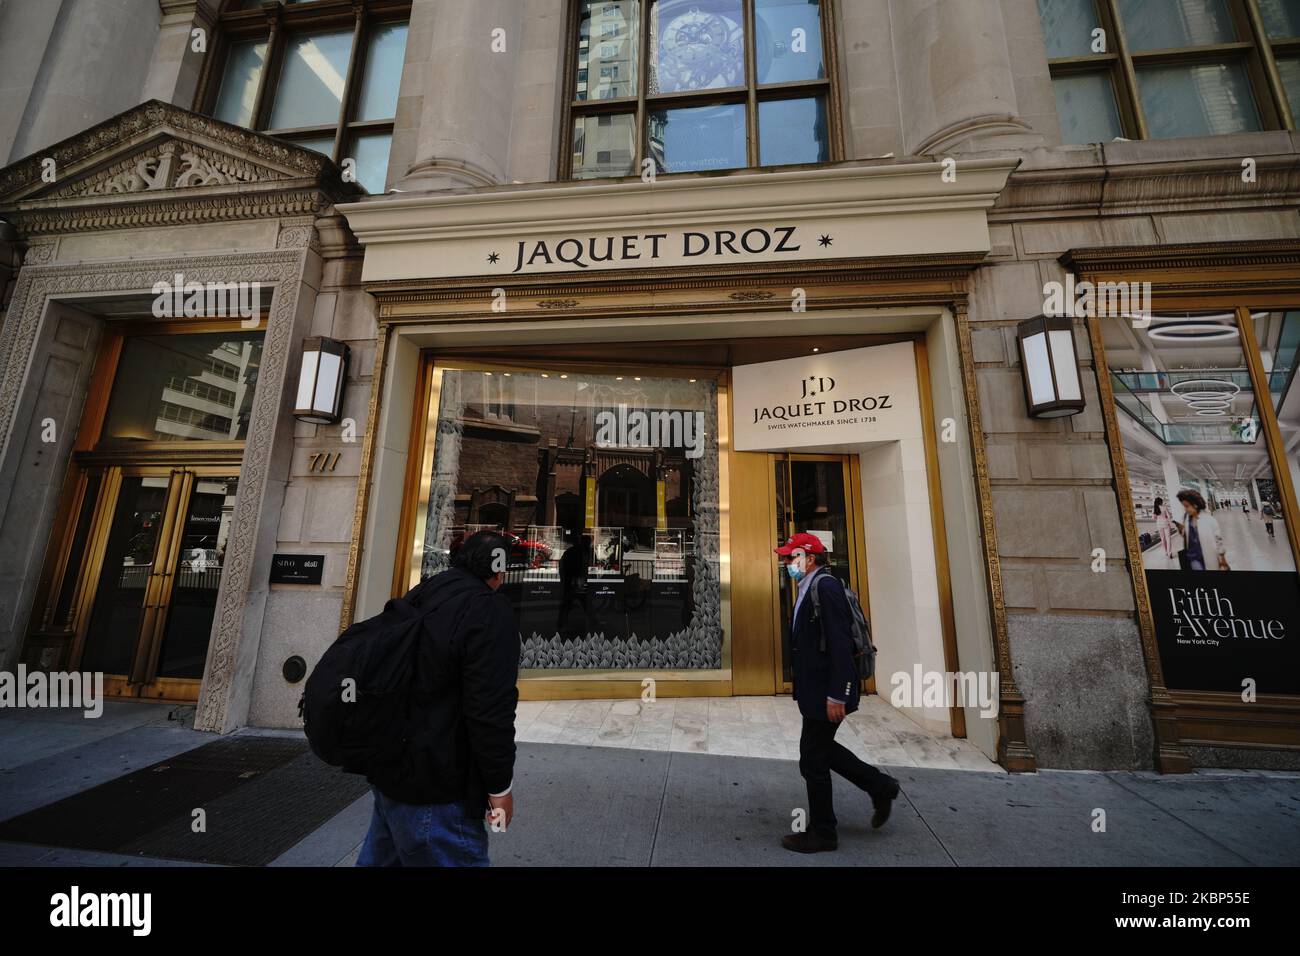 A view of Jaquet Droz Boutique during the coronavirus pandemic on May 20, 2020 in 5th Ave., New York City. COVID-19 has spread to most countries around the world, claiming over 316,000 lives with over 4.8 million infections reported. (Photo by John Nacion/NurPhoto) Stock Photo